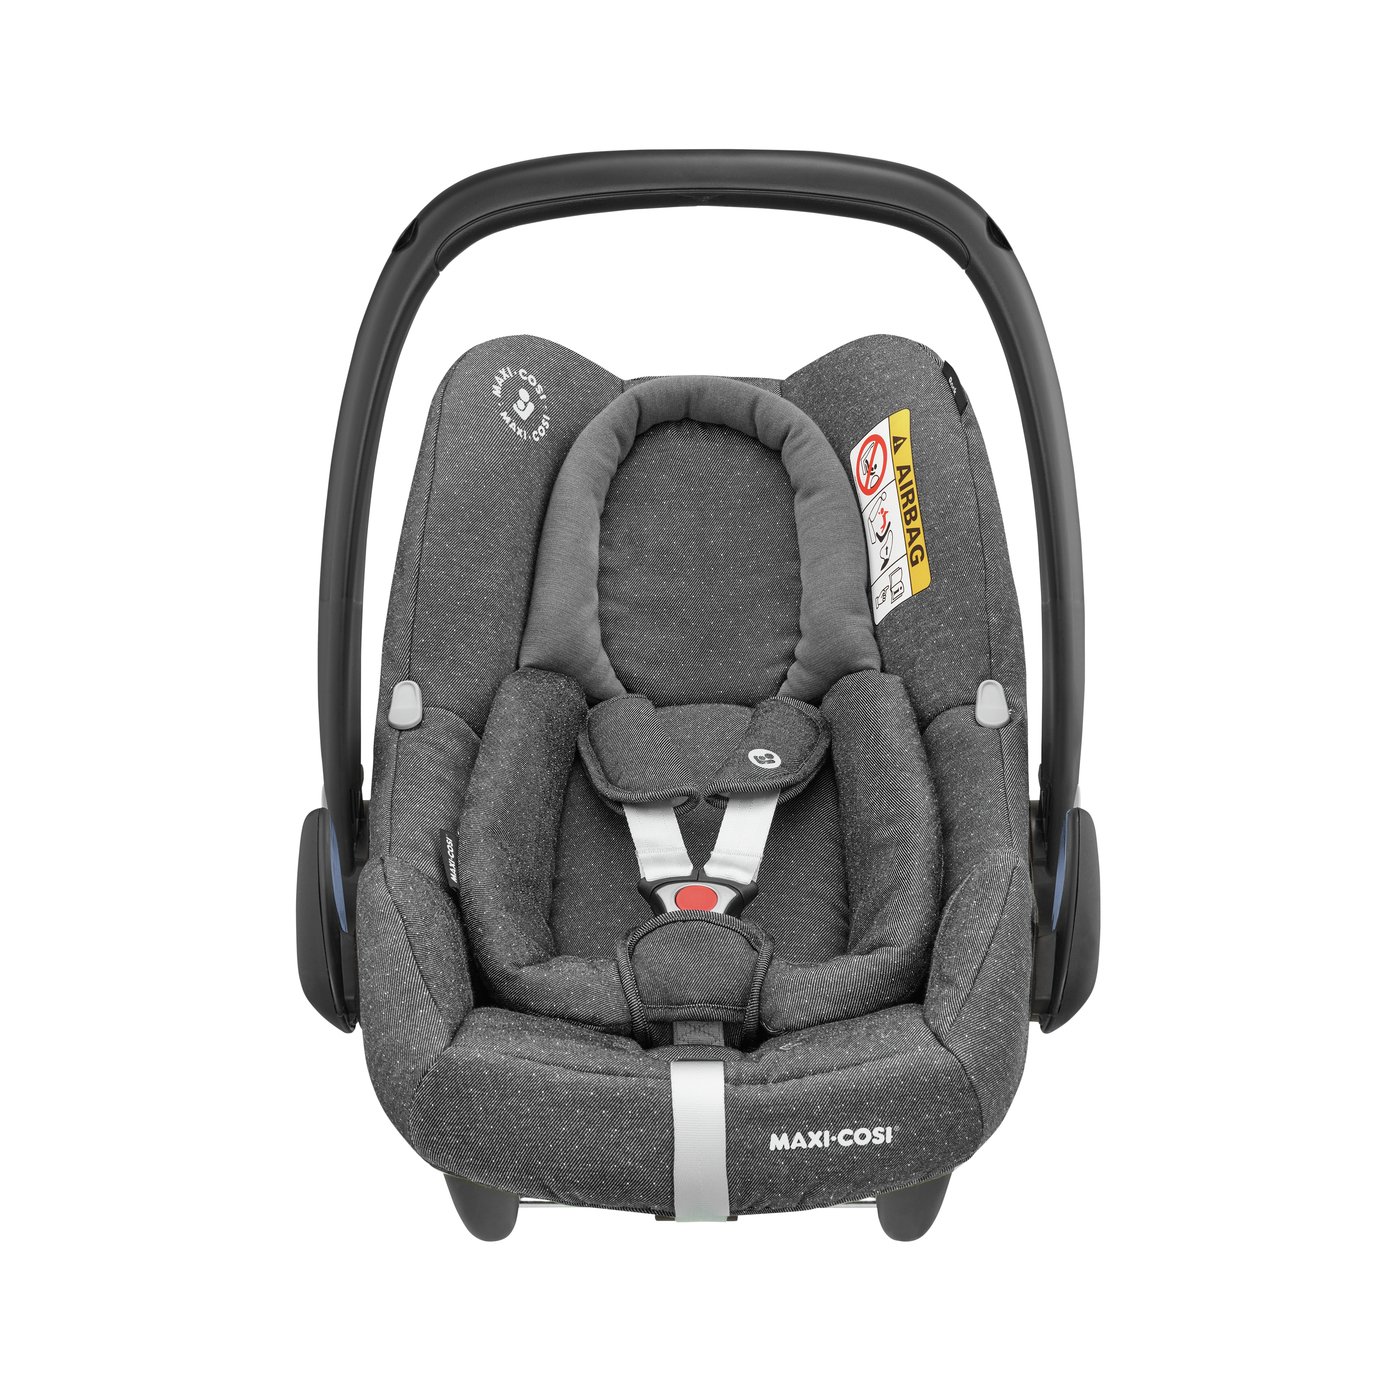 Maxi-Cosi Rock Group 0+ i-Size Baby Car Seat -Sparkling Grey Review